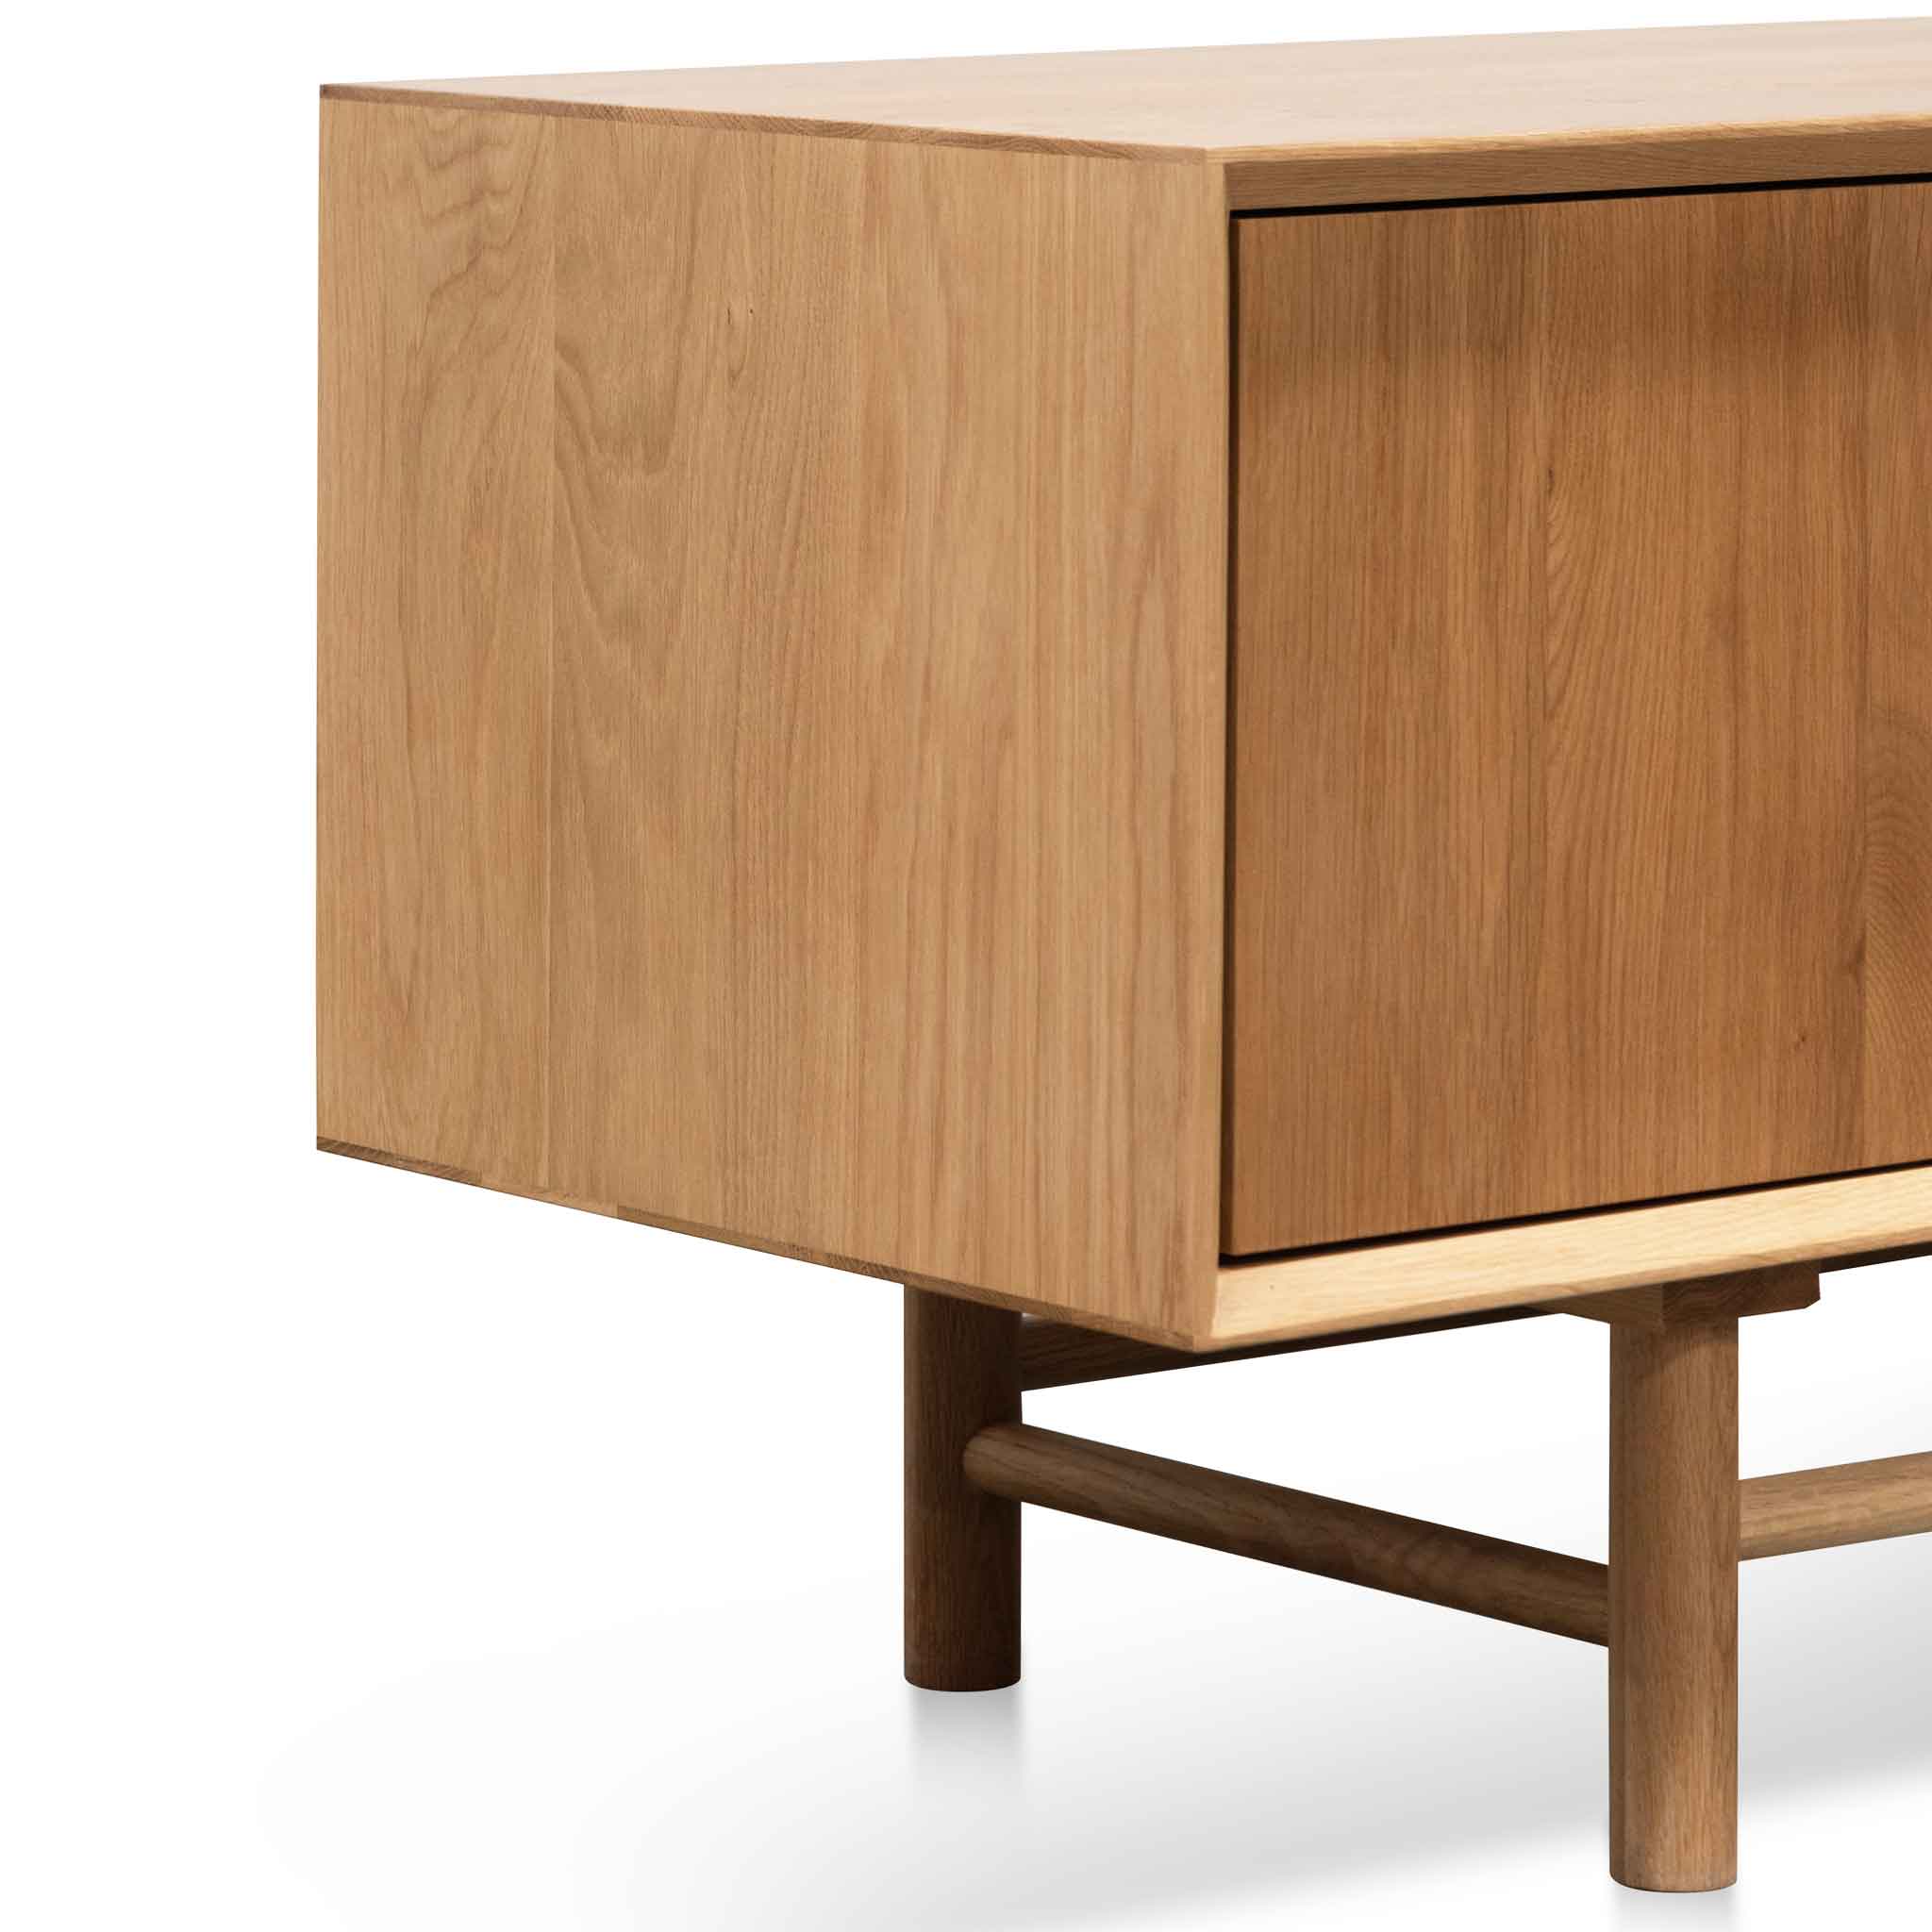 Damien Wooden TV Stand - Natural - TV Units